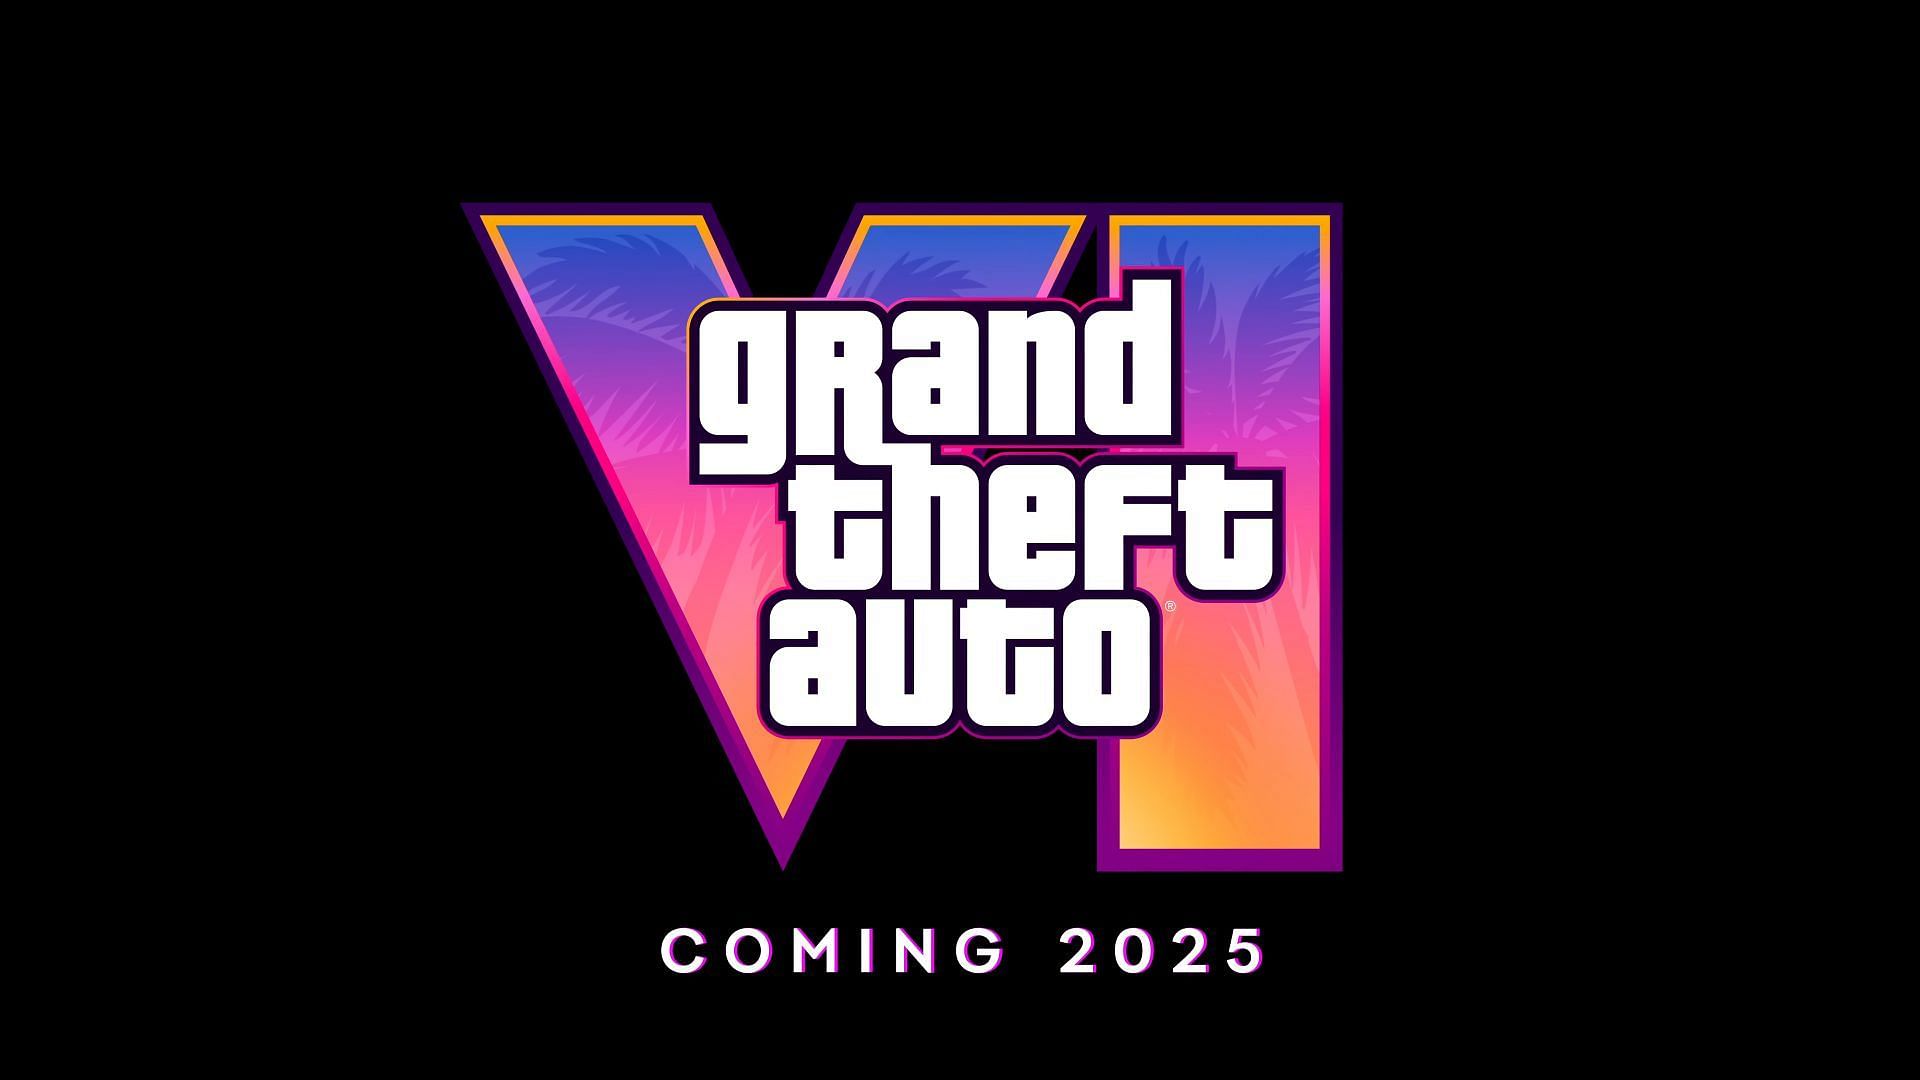 Rockstar Games&rsquo;s official statement about the Grand Theft Auto 6 release date. (Image via Rockstar Games)